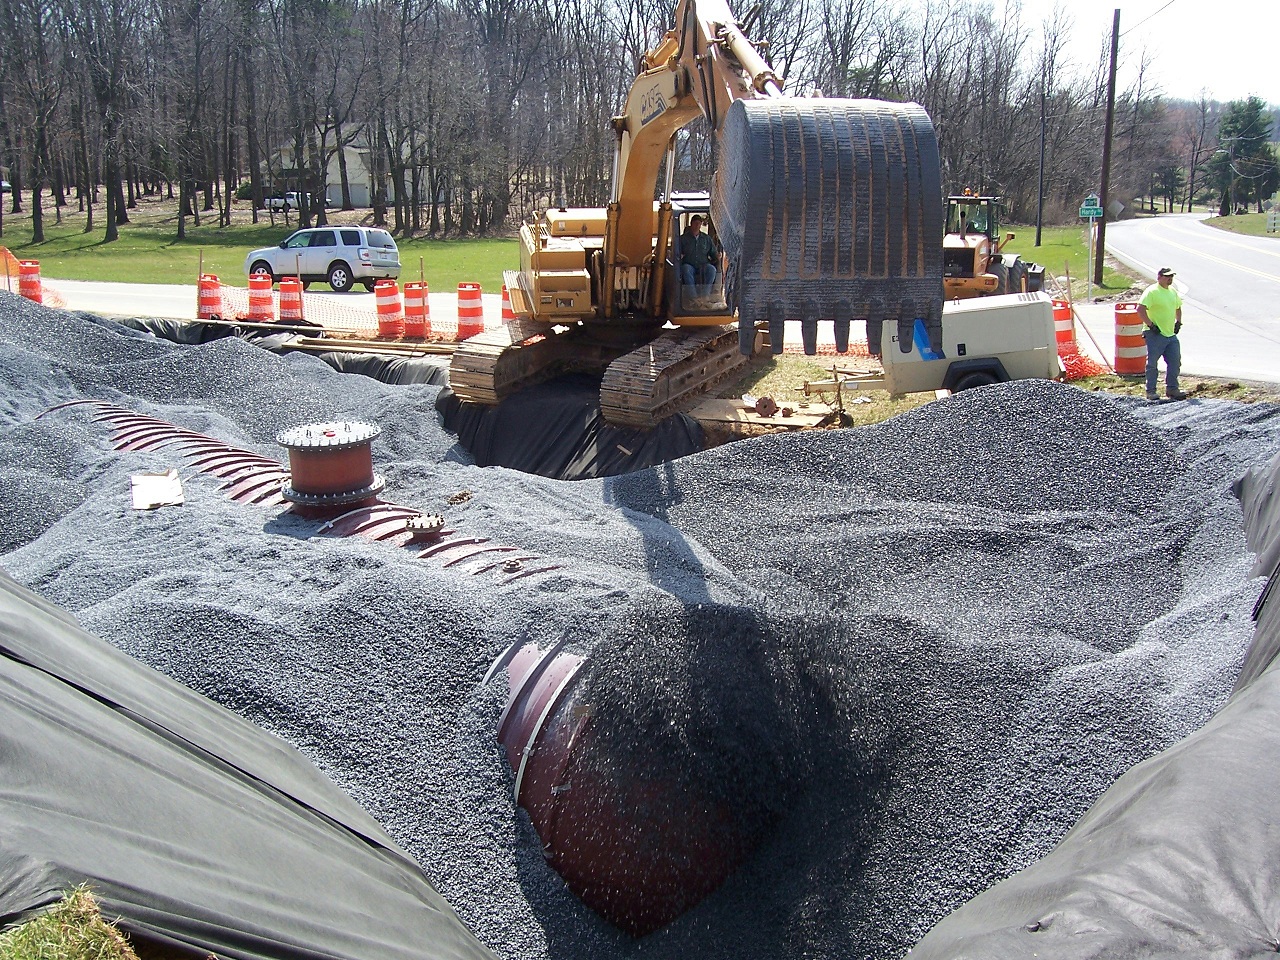 infilling the hole with gravel after placing an underground water tank